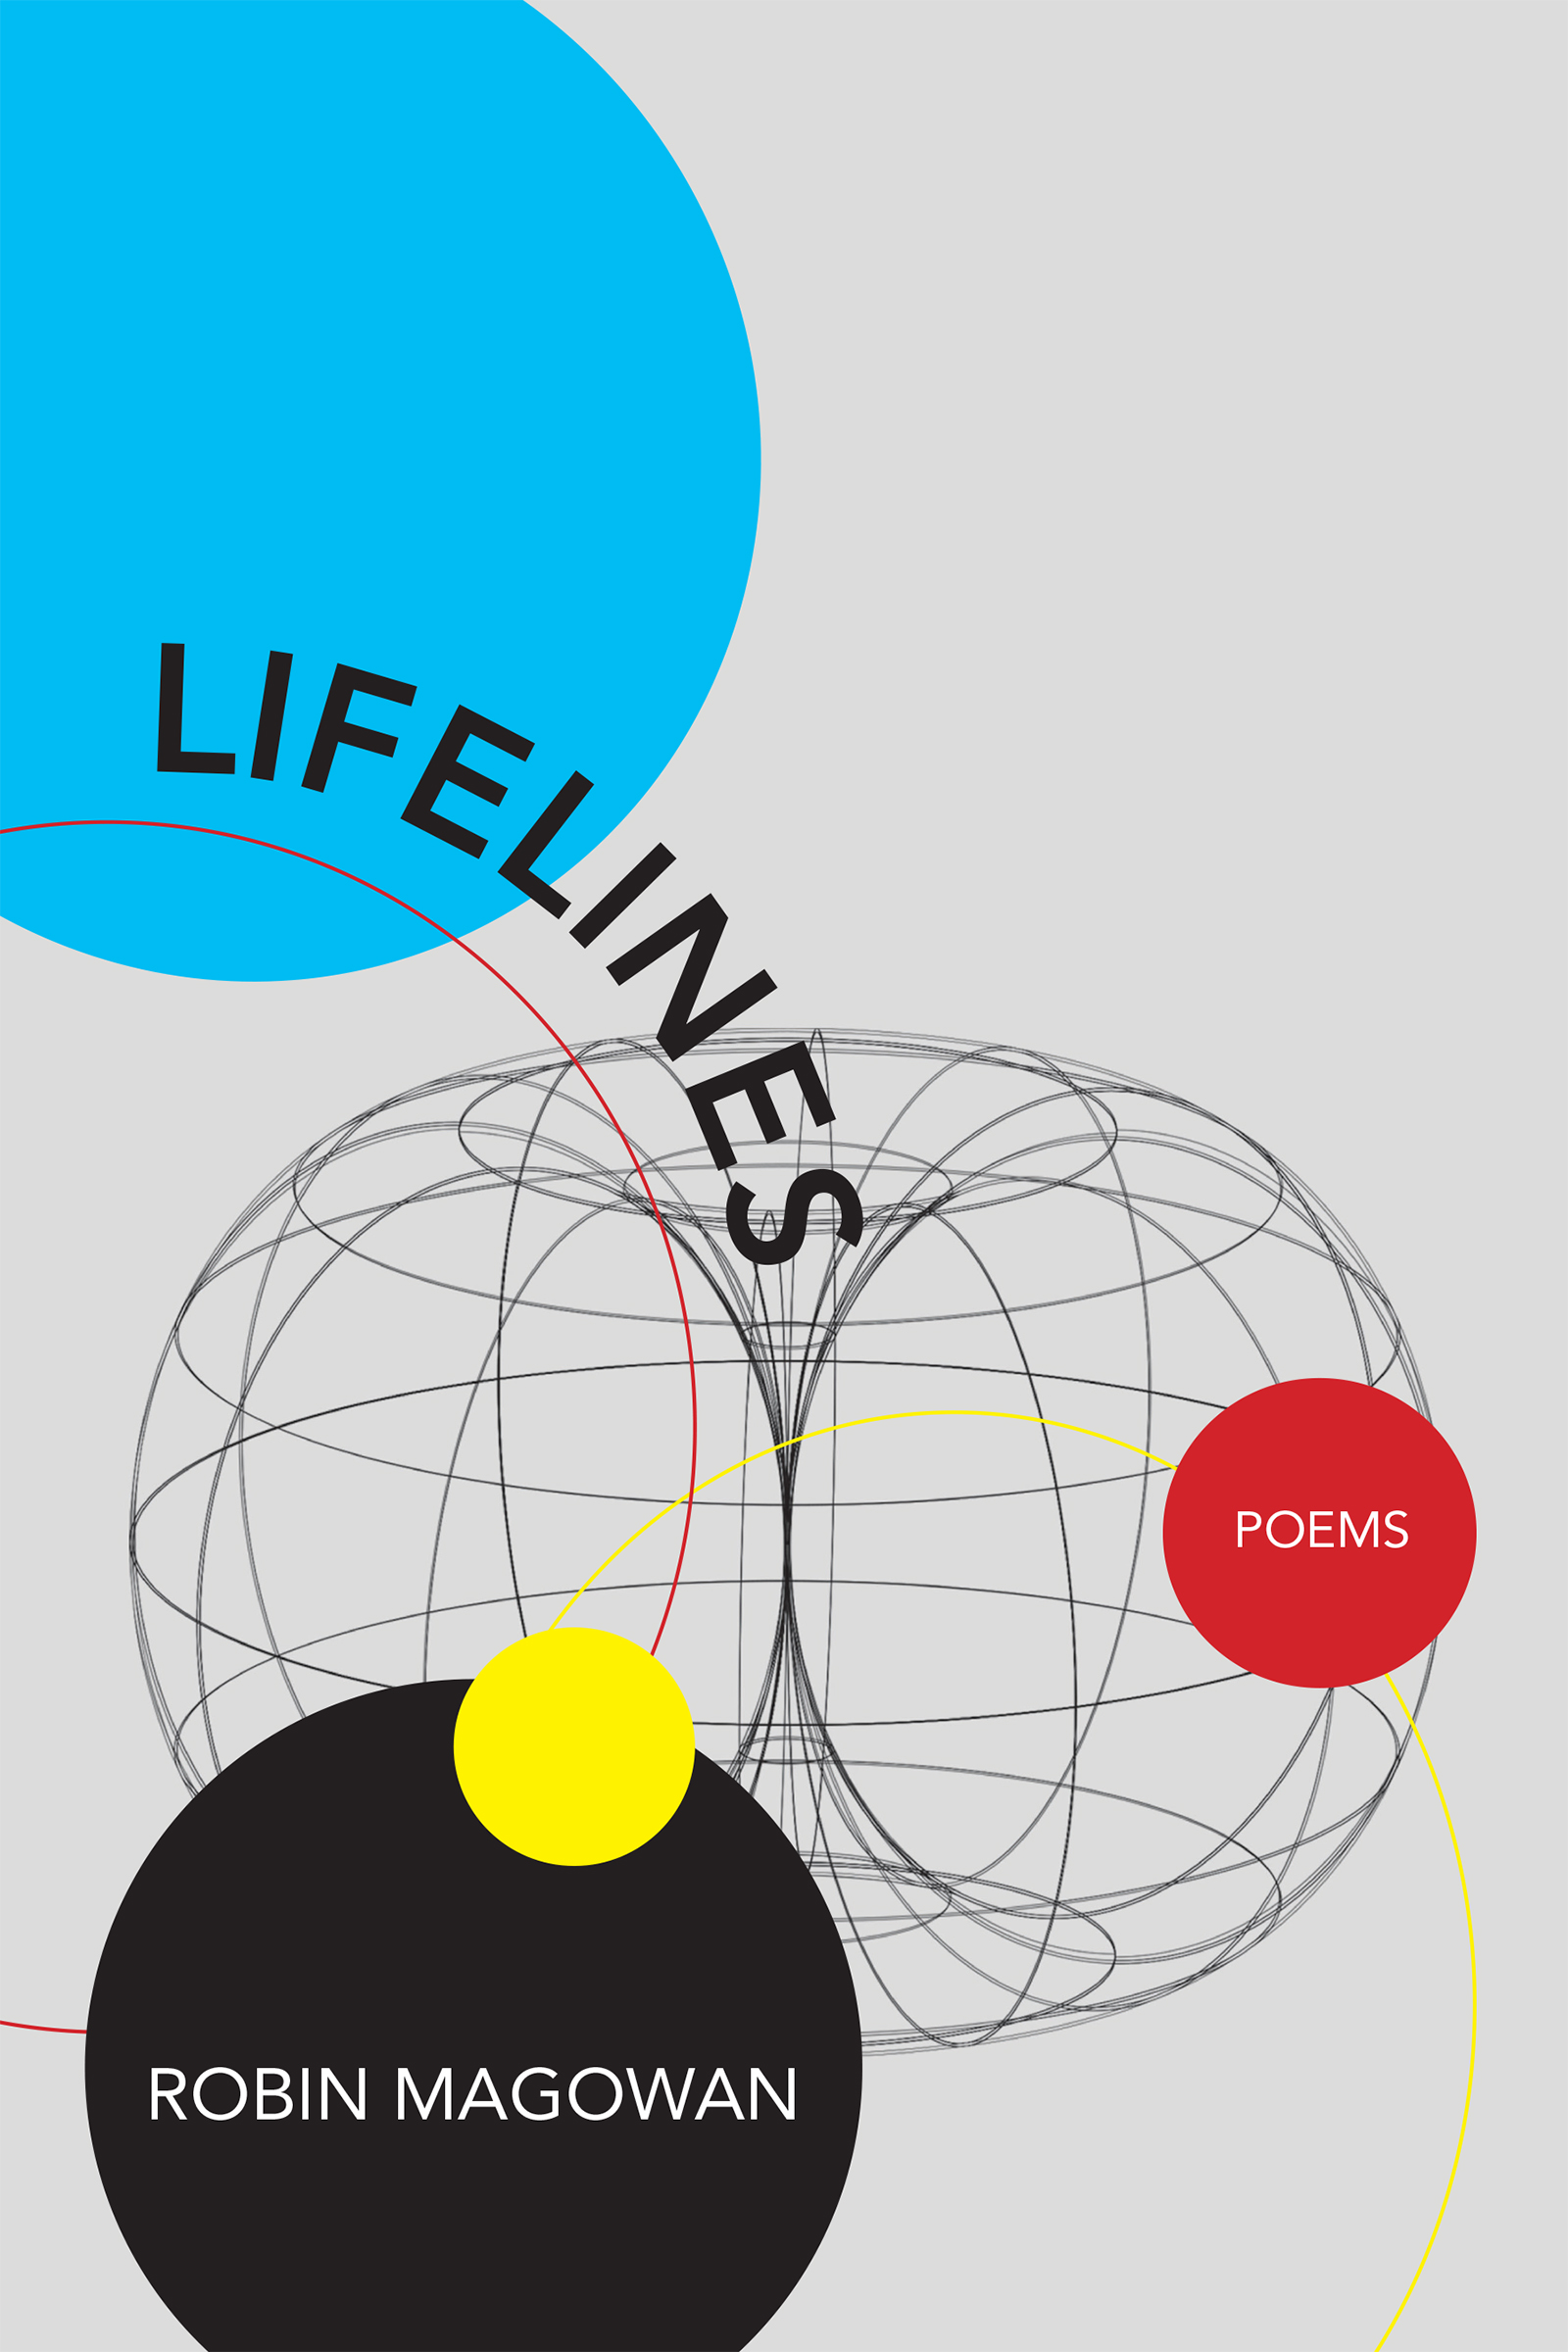 A grey background with cyan, yellow, red, and black circles, plus a geometric outline of a sphere, with text reading "Lifelines, poems by Robin Magowan"